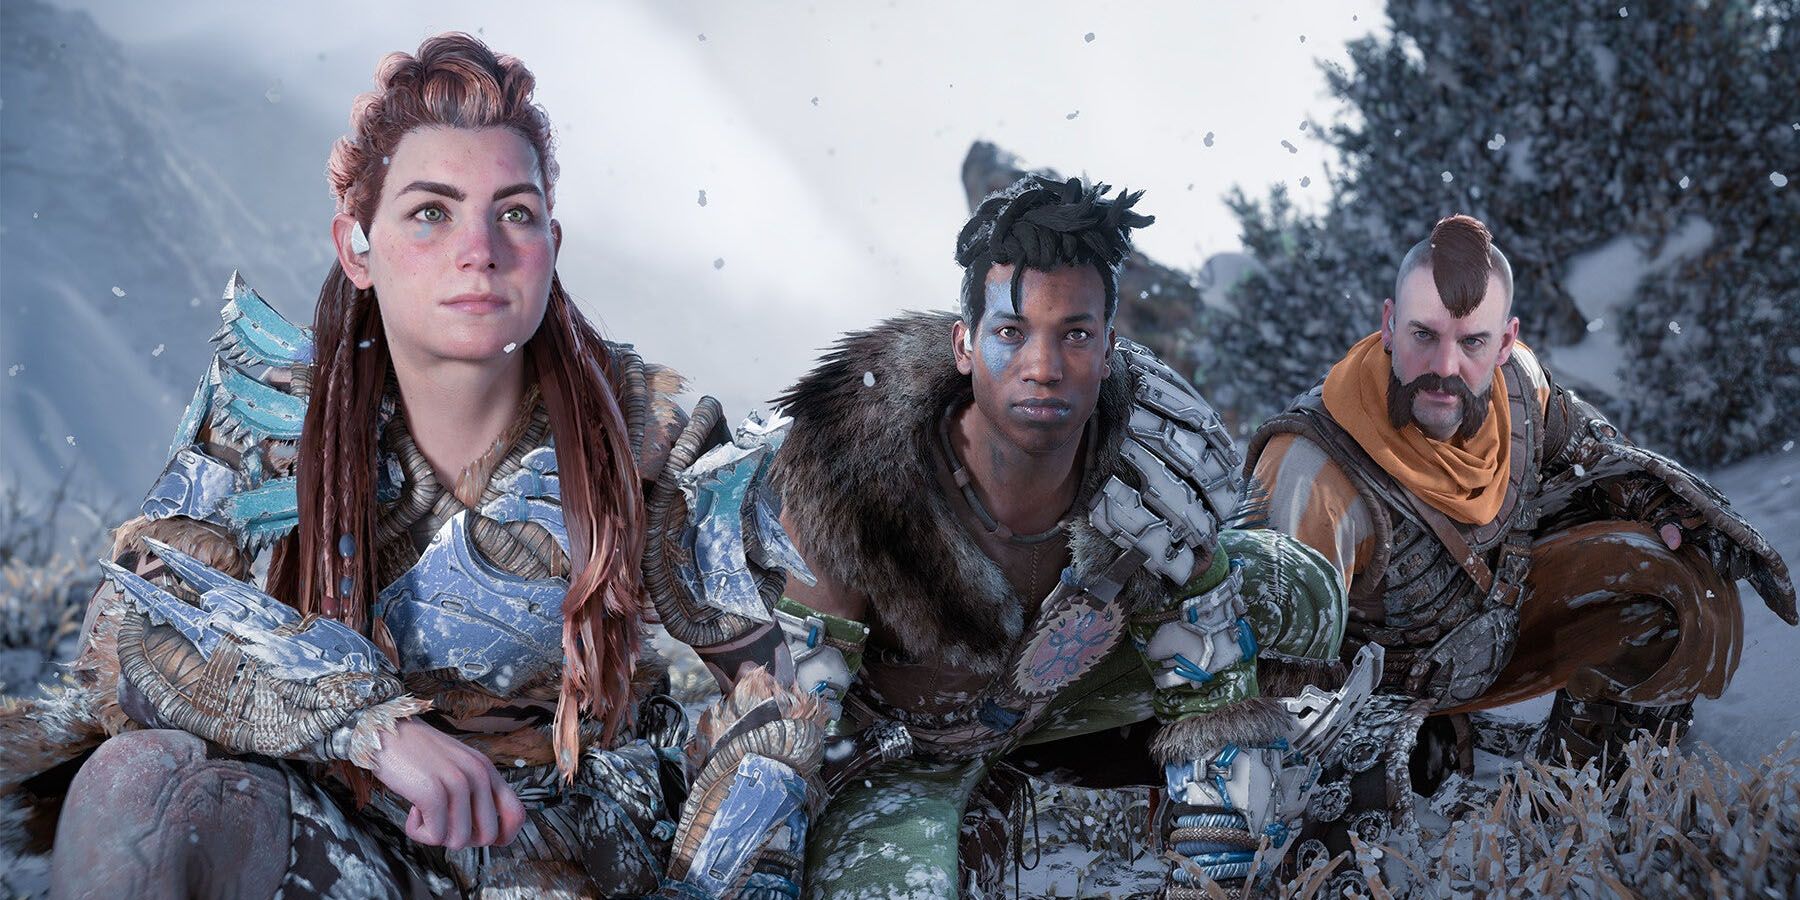 A screenshot of Aloy and her friends kneeling in a snow-covered enviroment in Horizon Forbidden West.